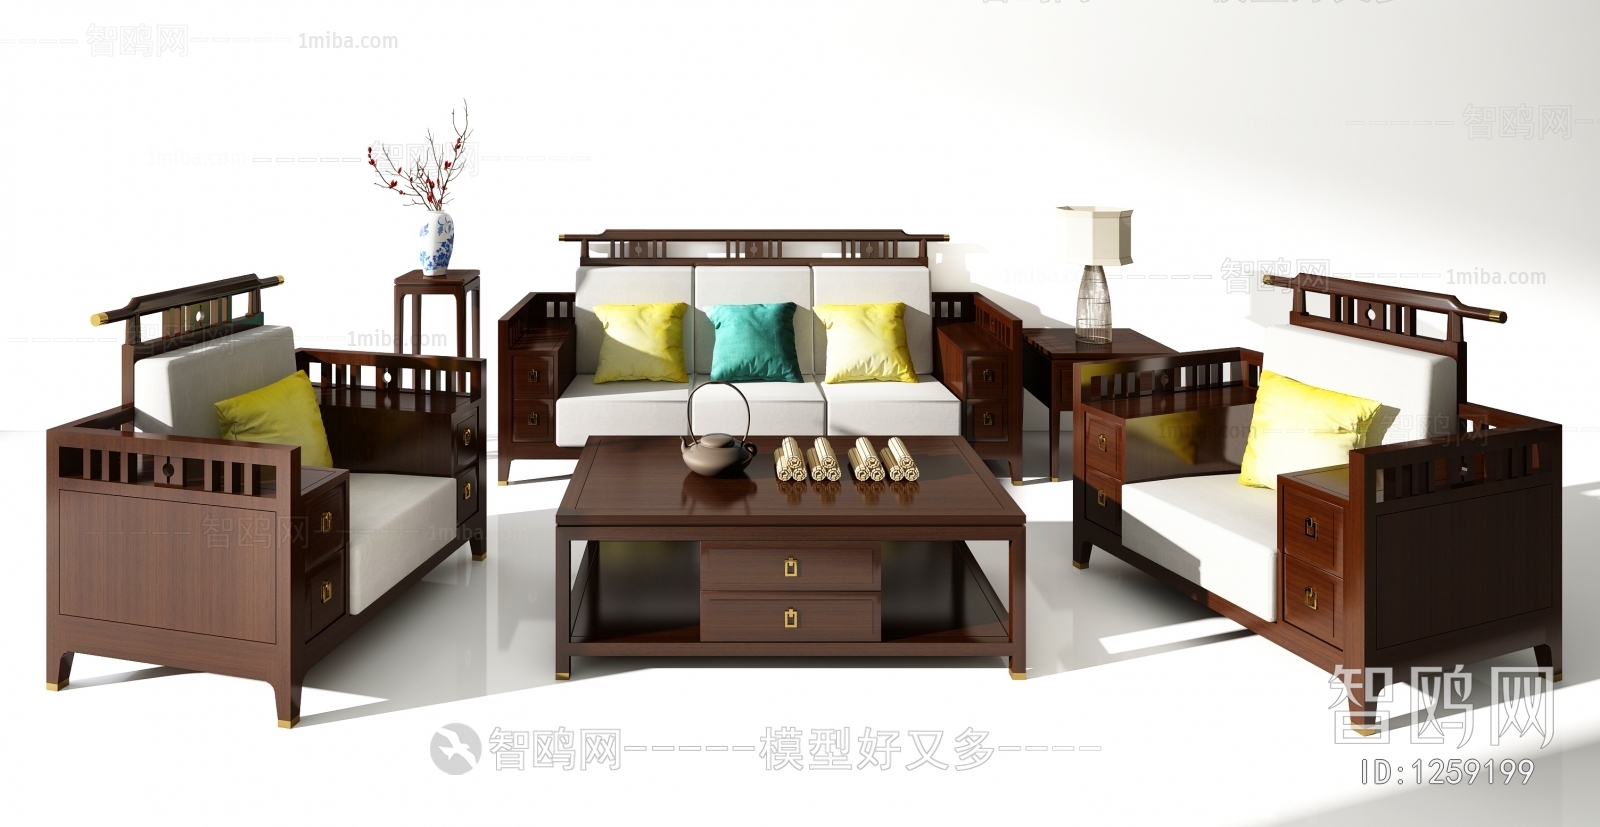 Chinese Style Sofa Combination